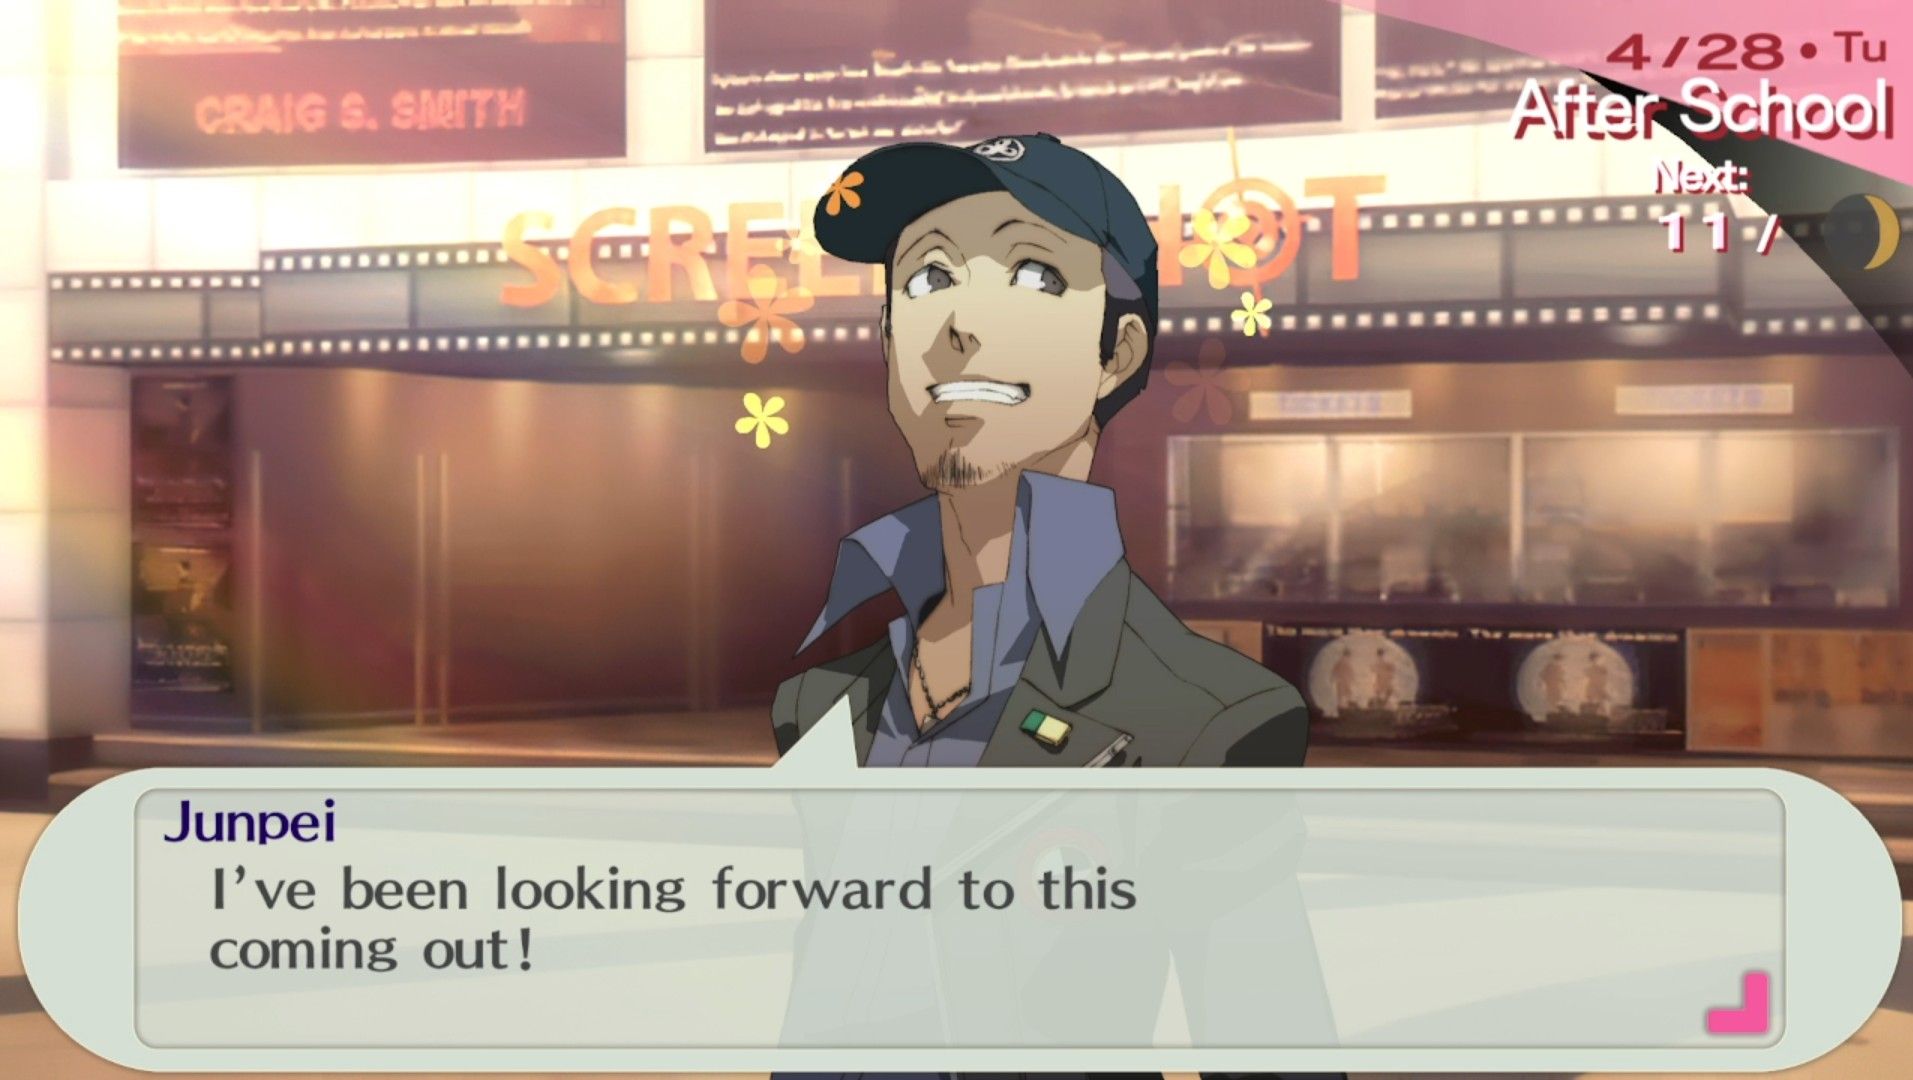 screenshot of junpei outside screenshot the movie theater in persona 3 portable